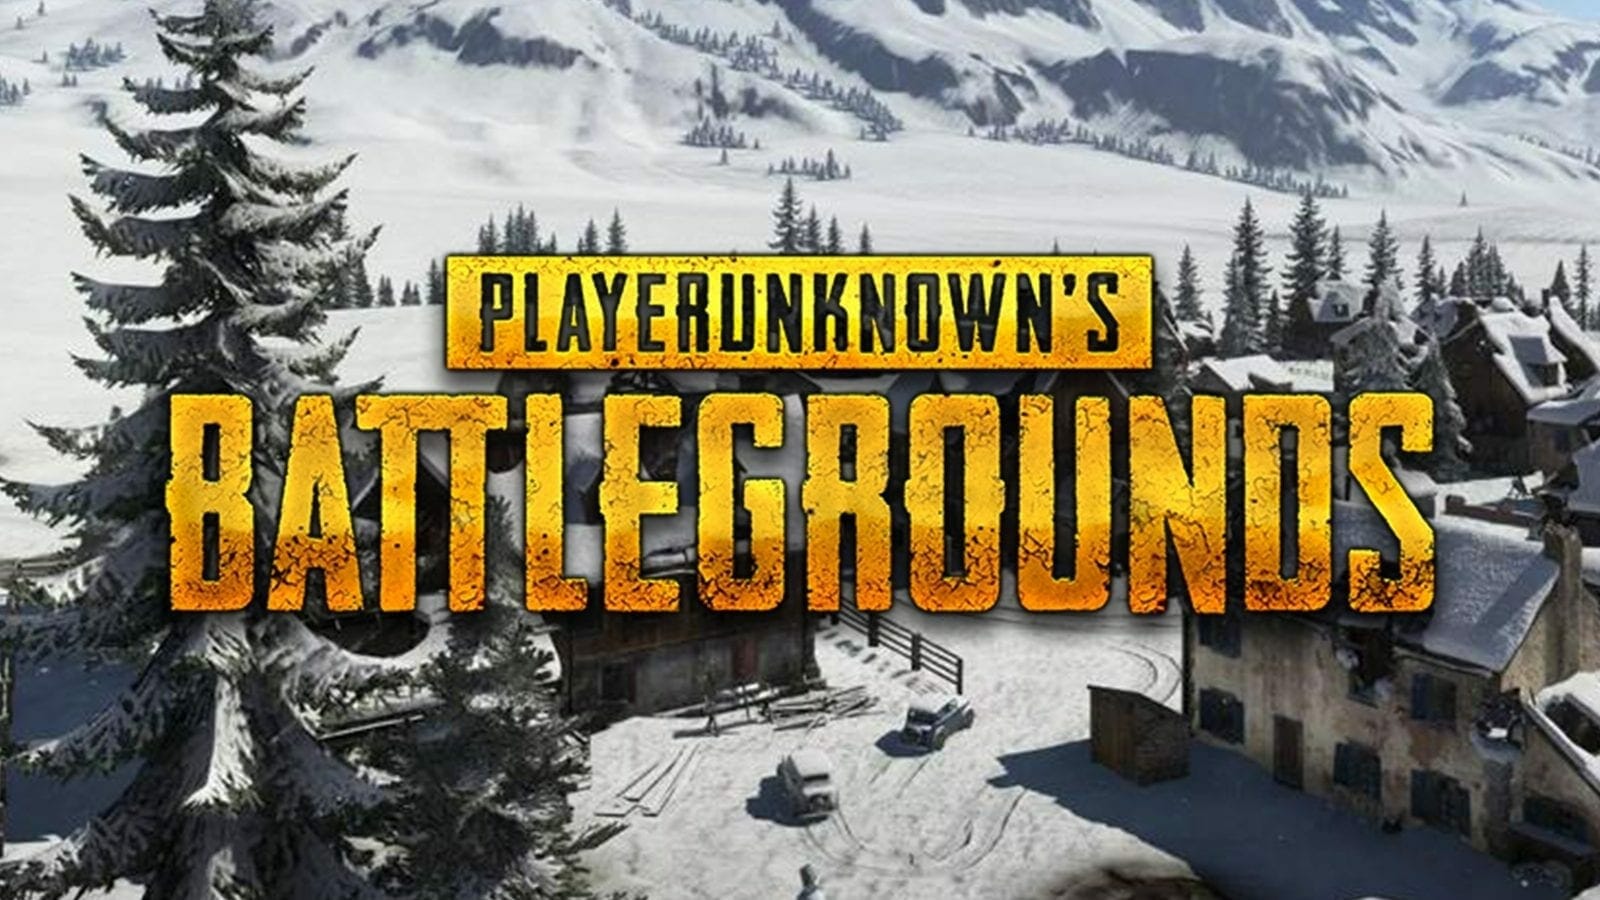 Pubg Mobile 0 12 5 For Android Apk And Ios Ipa Released - pubg mobile 0 12 5 for android apk and ios ipa released features new vikendi map snow mobile assault rifle